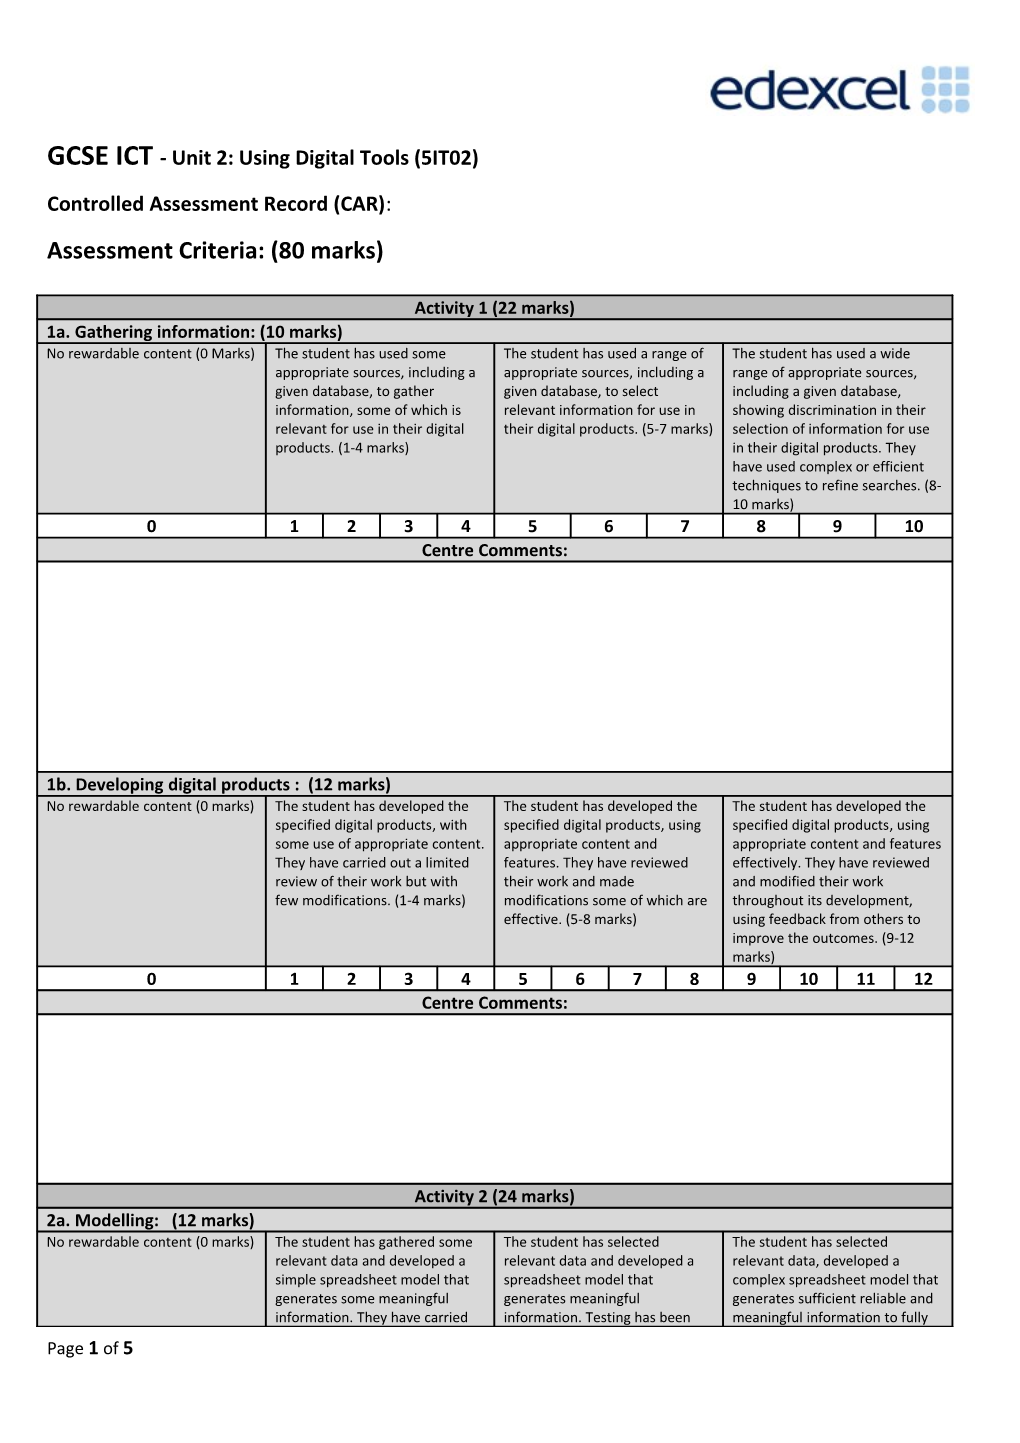 Unit 2 - Controlled Assessment Record (CAR)